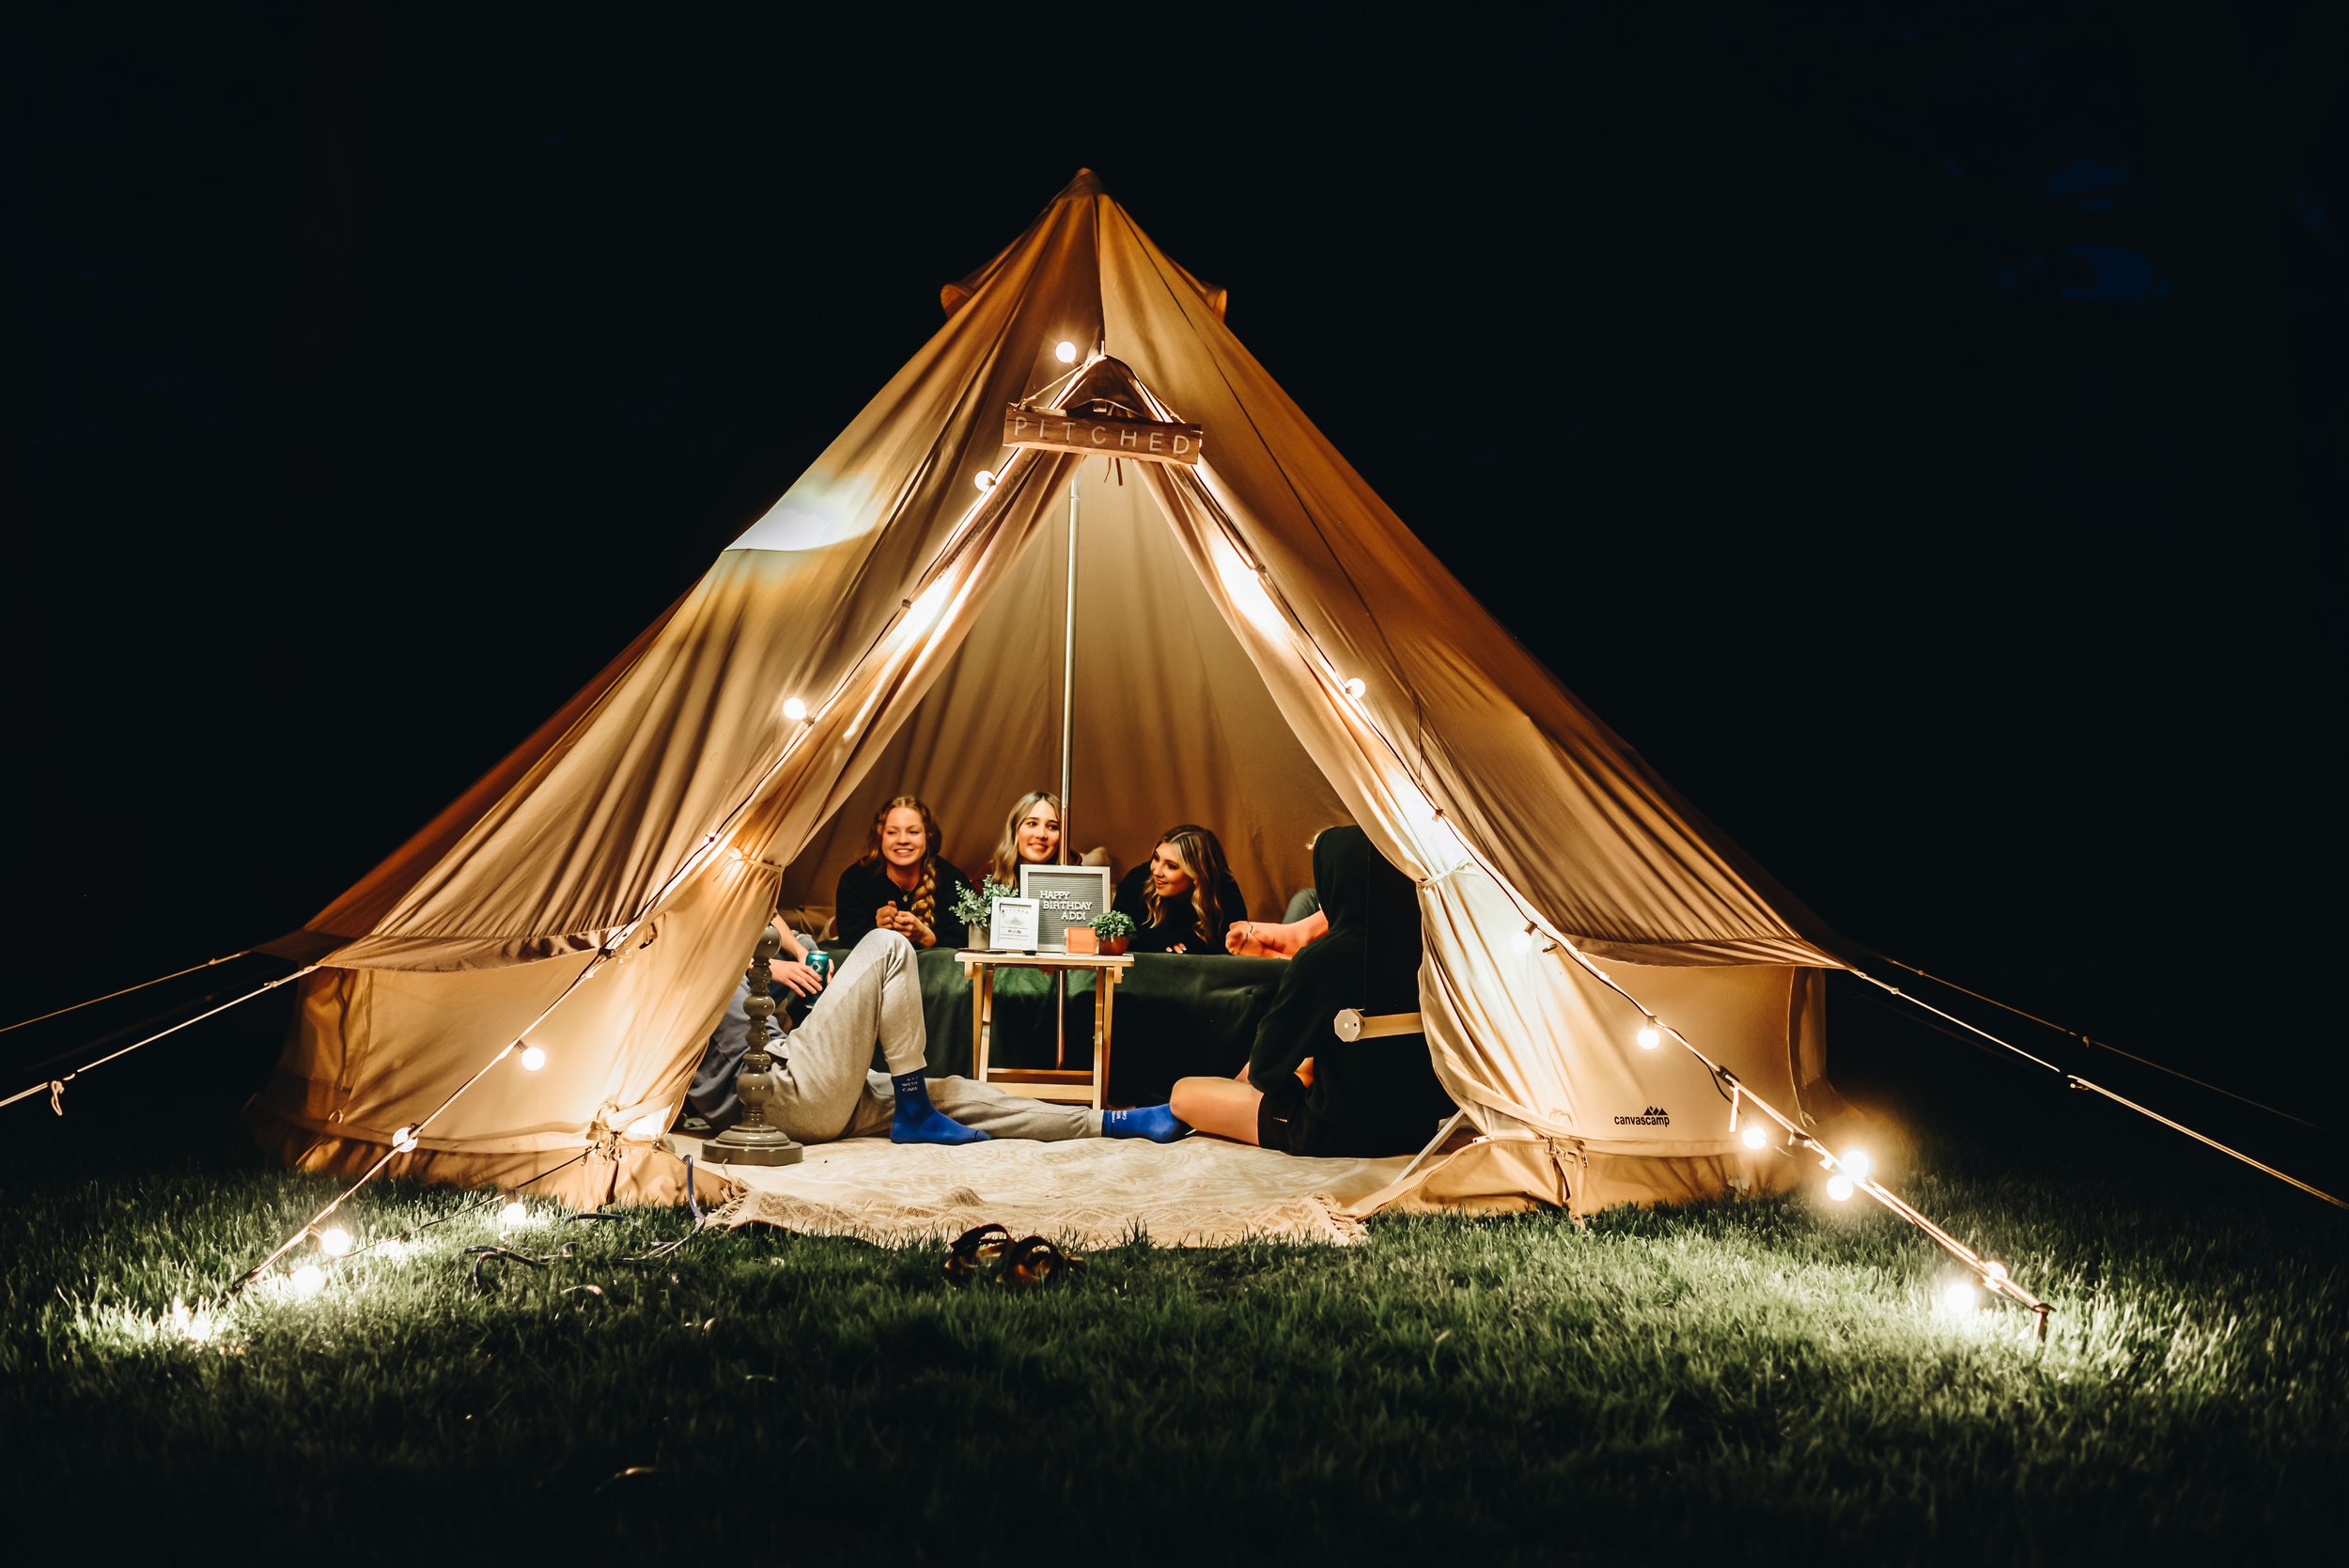 Glamping Tent Rental + Delivery // Weddings, Birthdays, Corporate